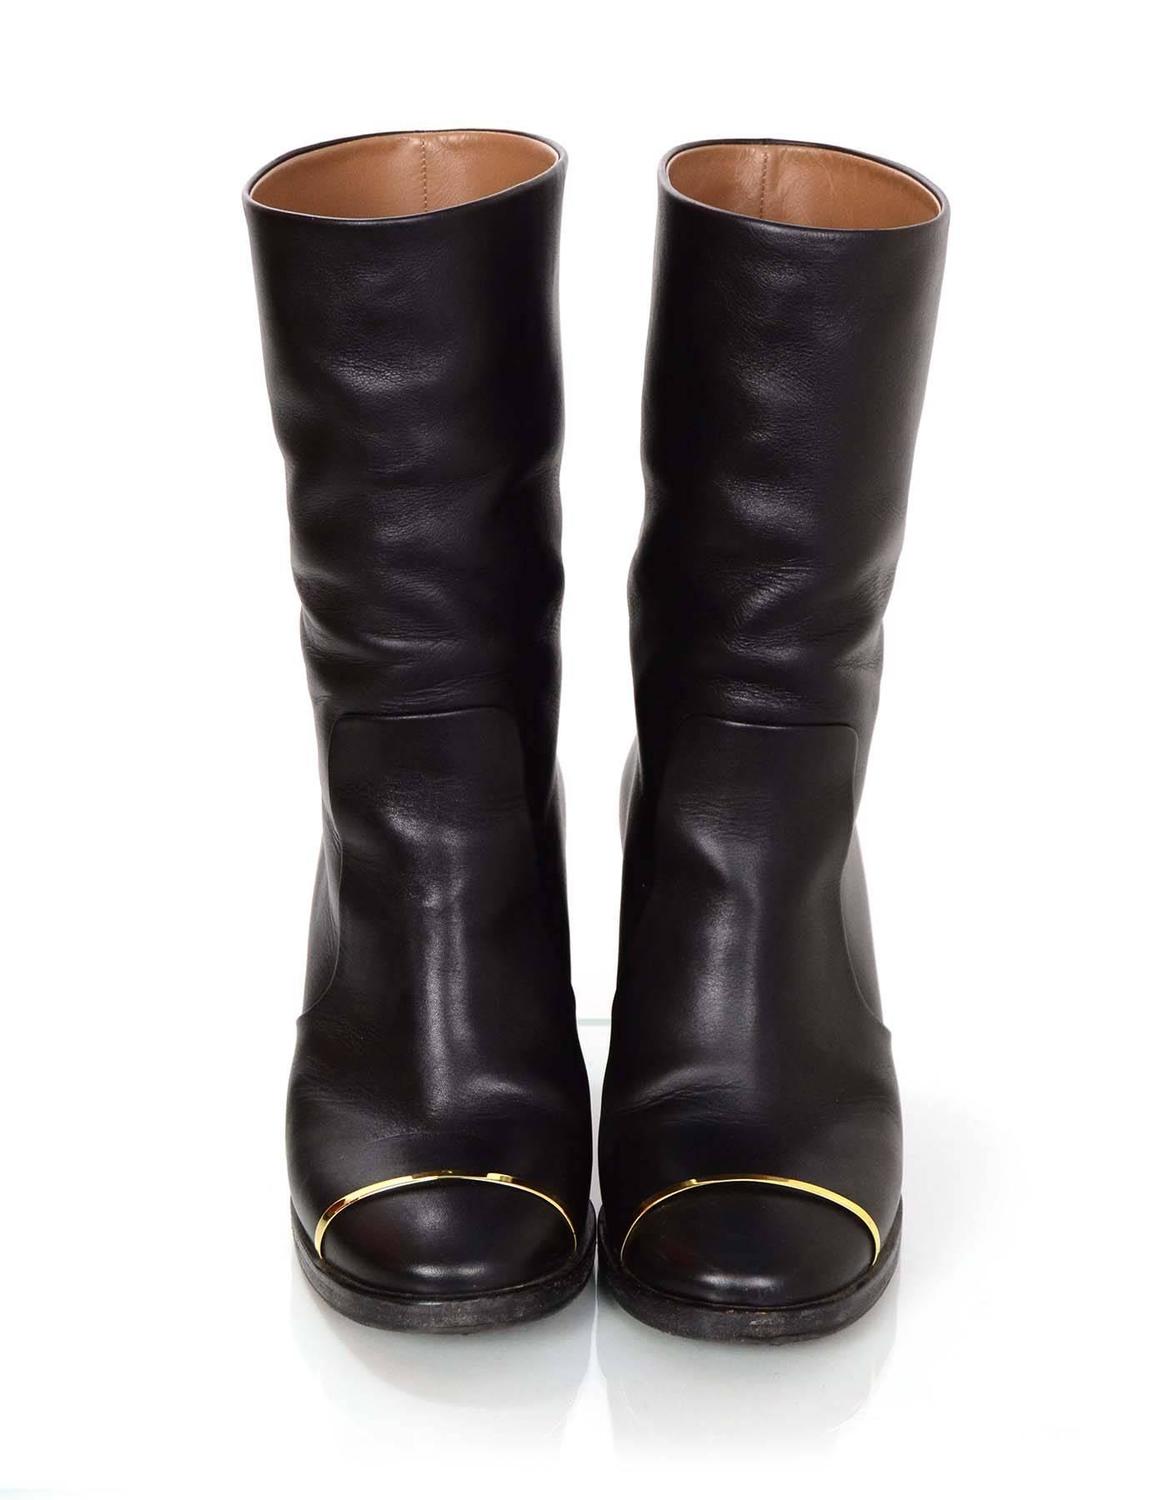 Chanel Black Leather Boots Sz 37.5 For Sale at 1stdibs